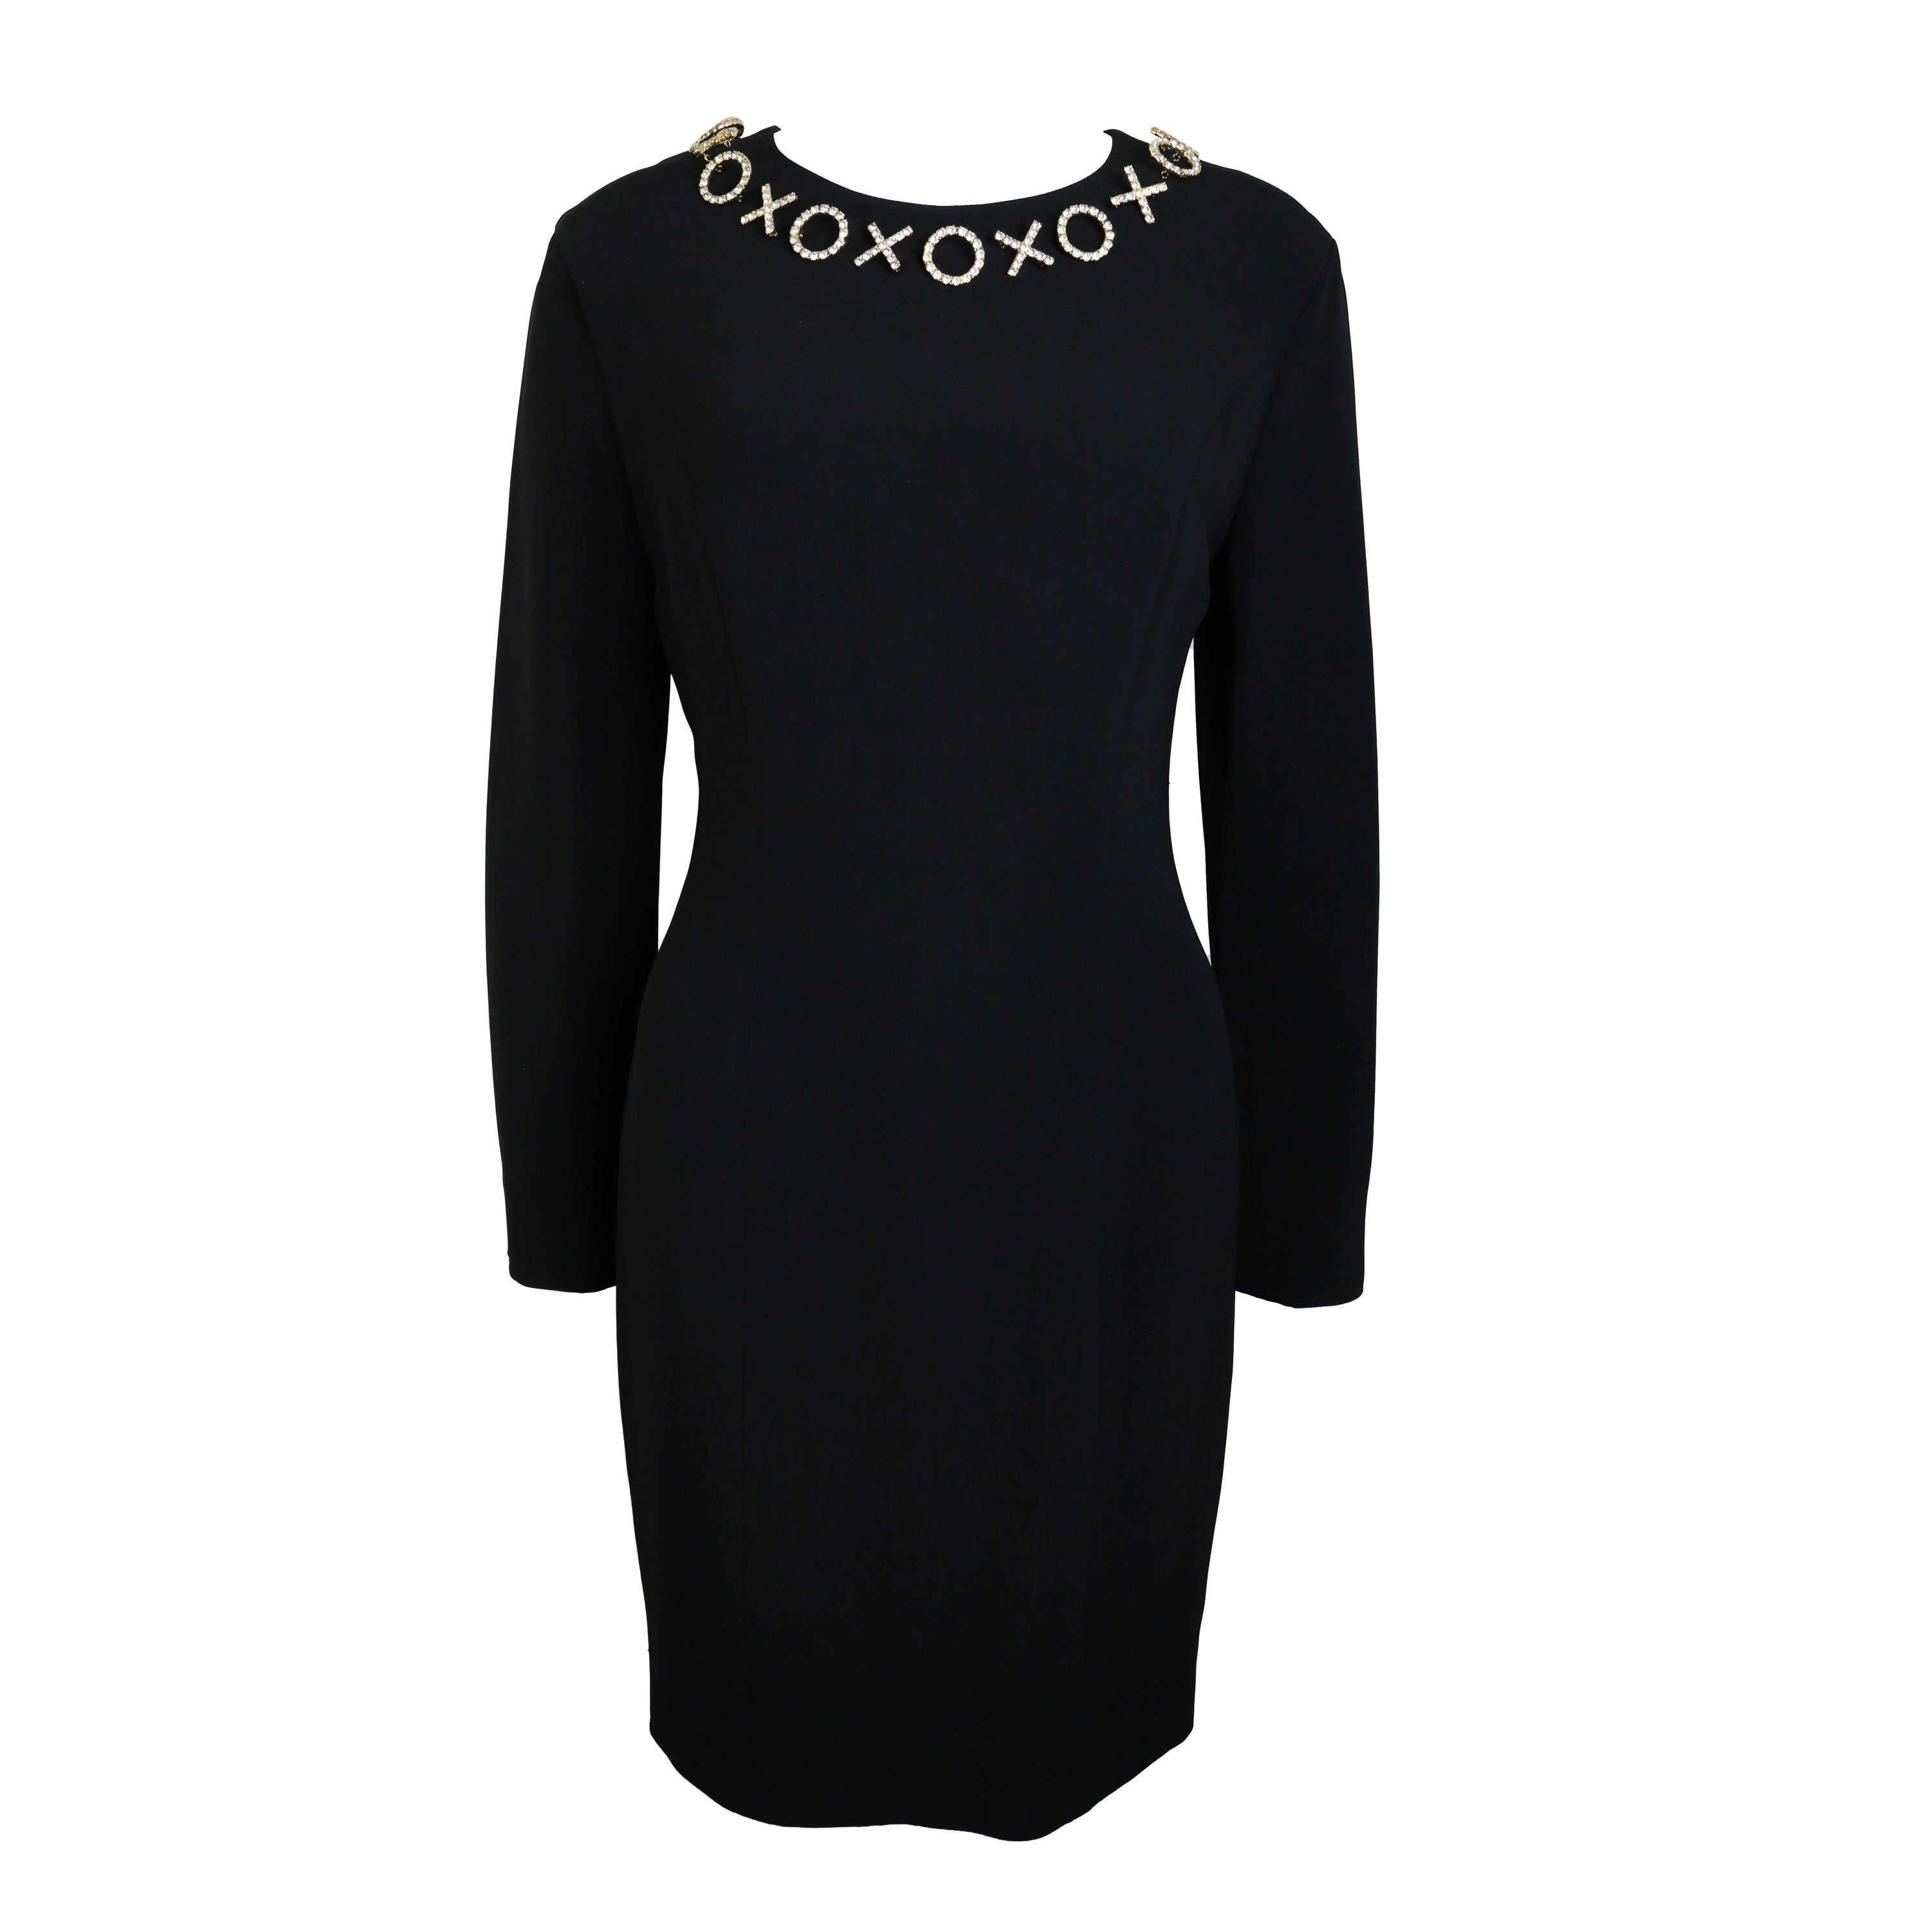 Vintage 90s Moschino Couture Black Dress For Sale